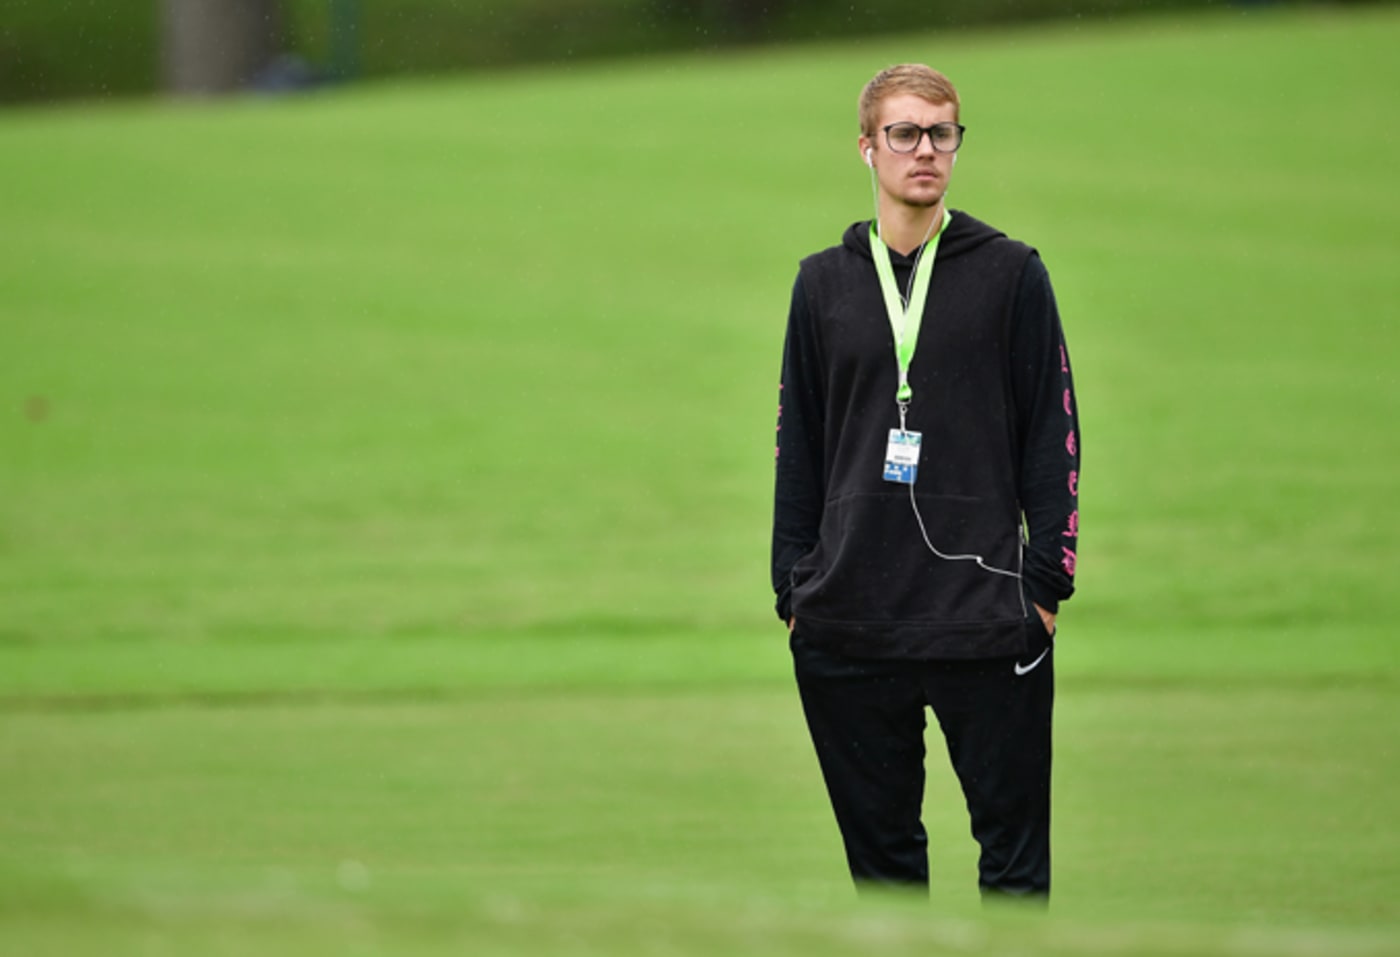 Justin Bieber attends a practice round prior to the 2017 PGA Championship